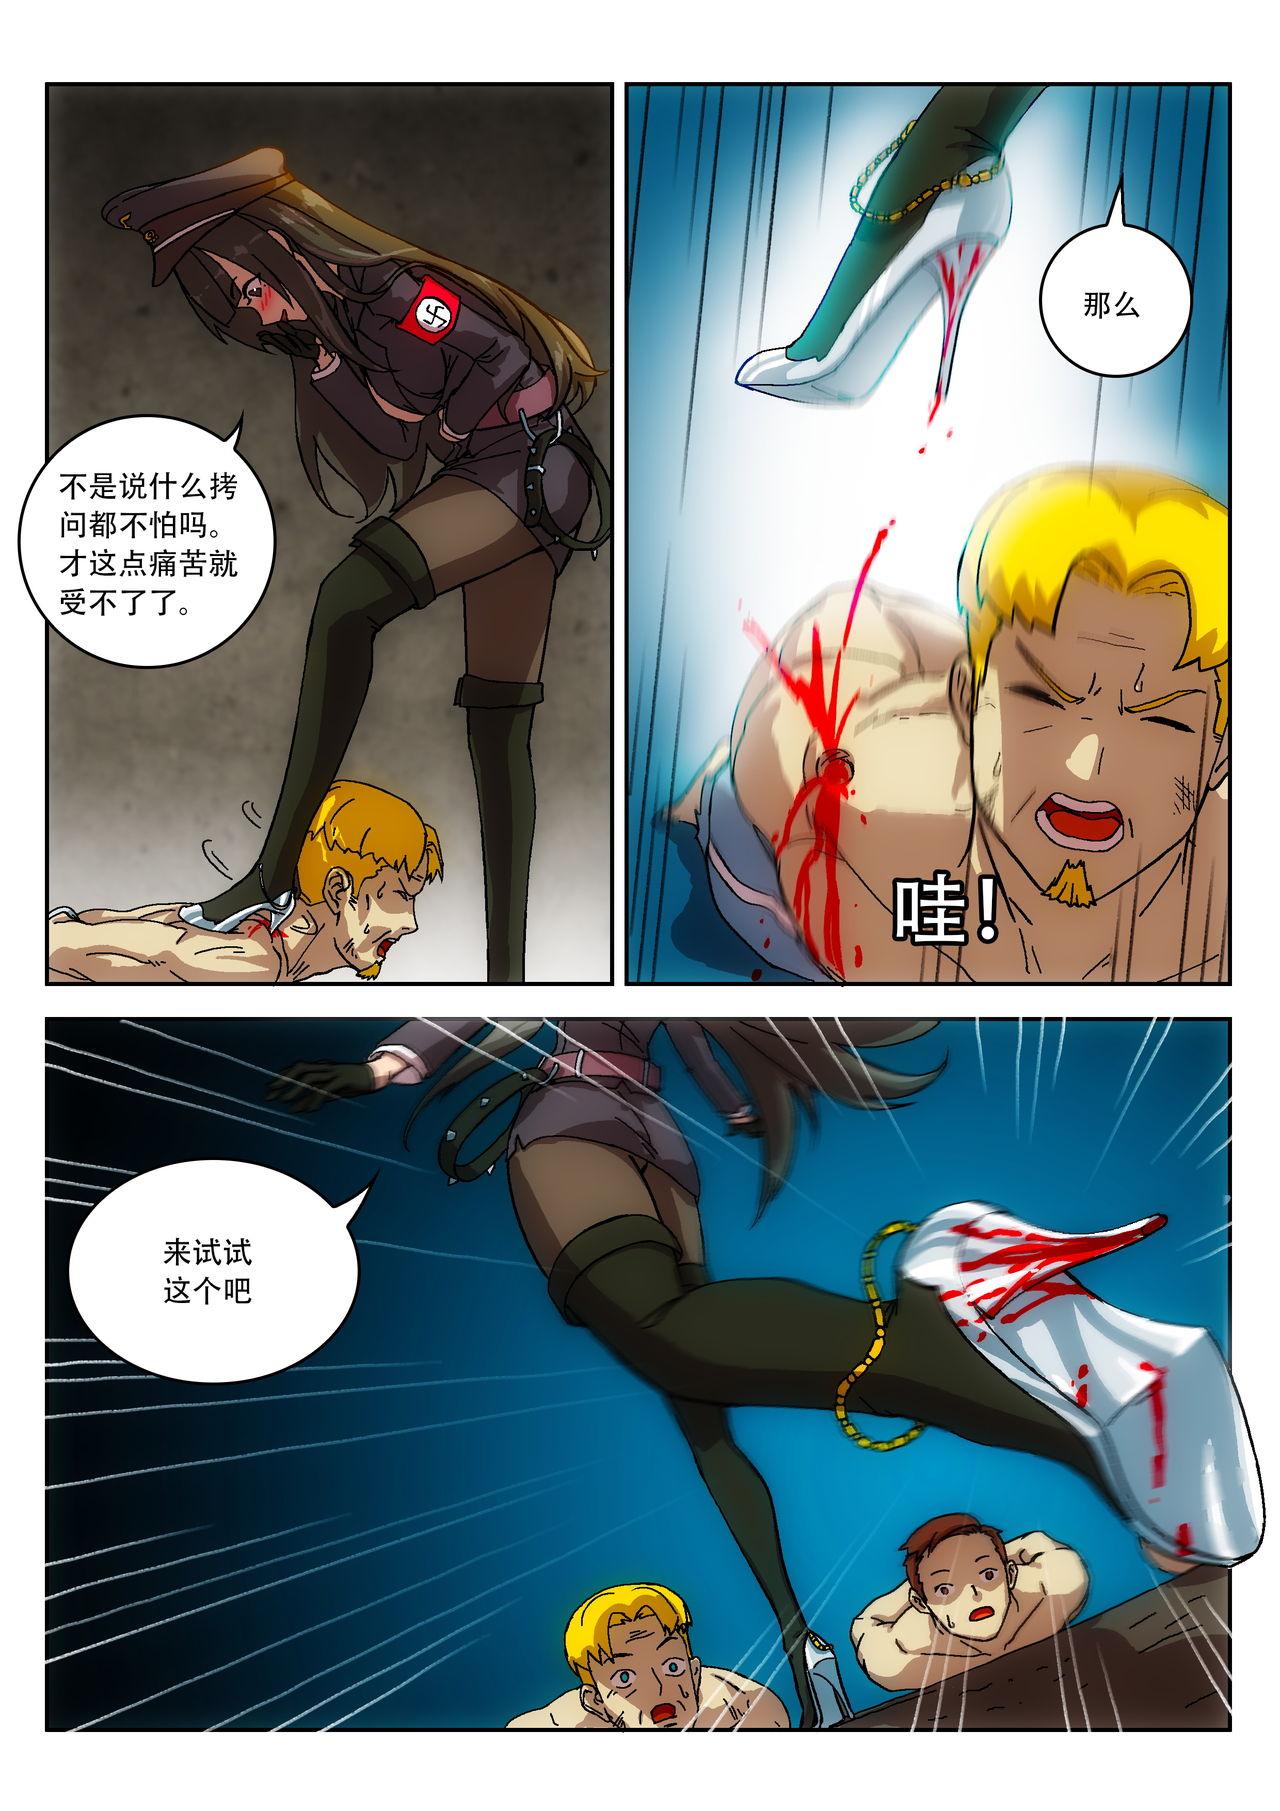 Humiliation [Weixiefashi] Empire executioner Alice-sama's thigh-high boots trampling crushing torturing session full colour [帝国处刑官爱丽丝大人的长靴踩杀拷问][全彩] Gay Blowjob - Page 5